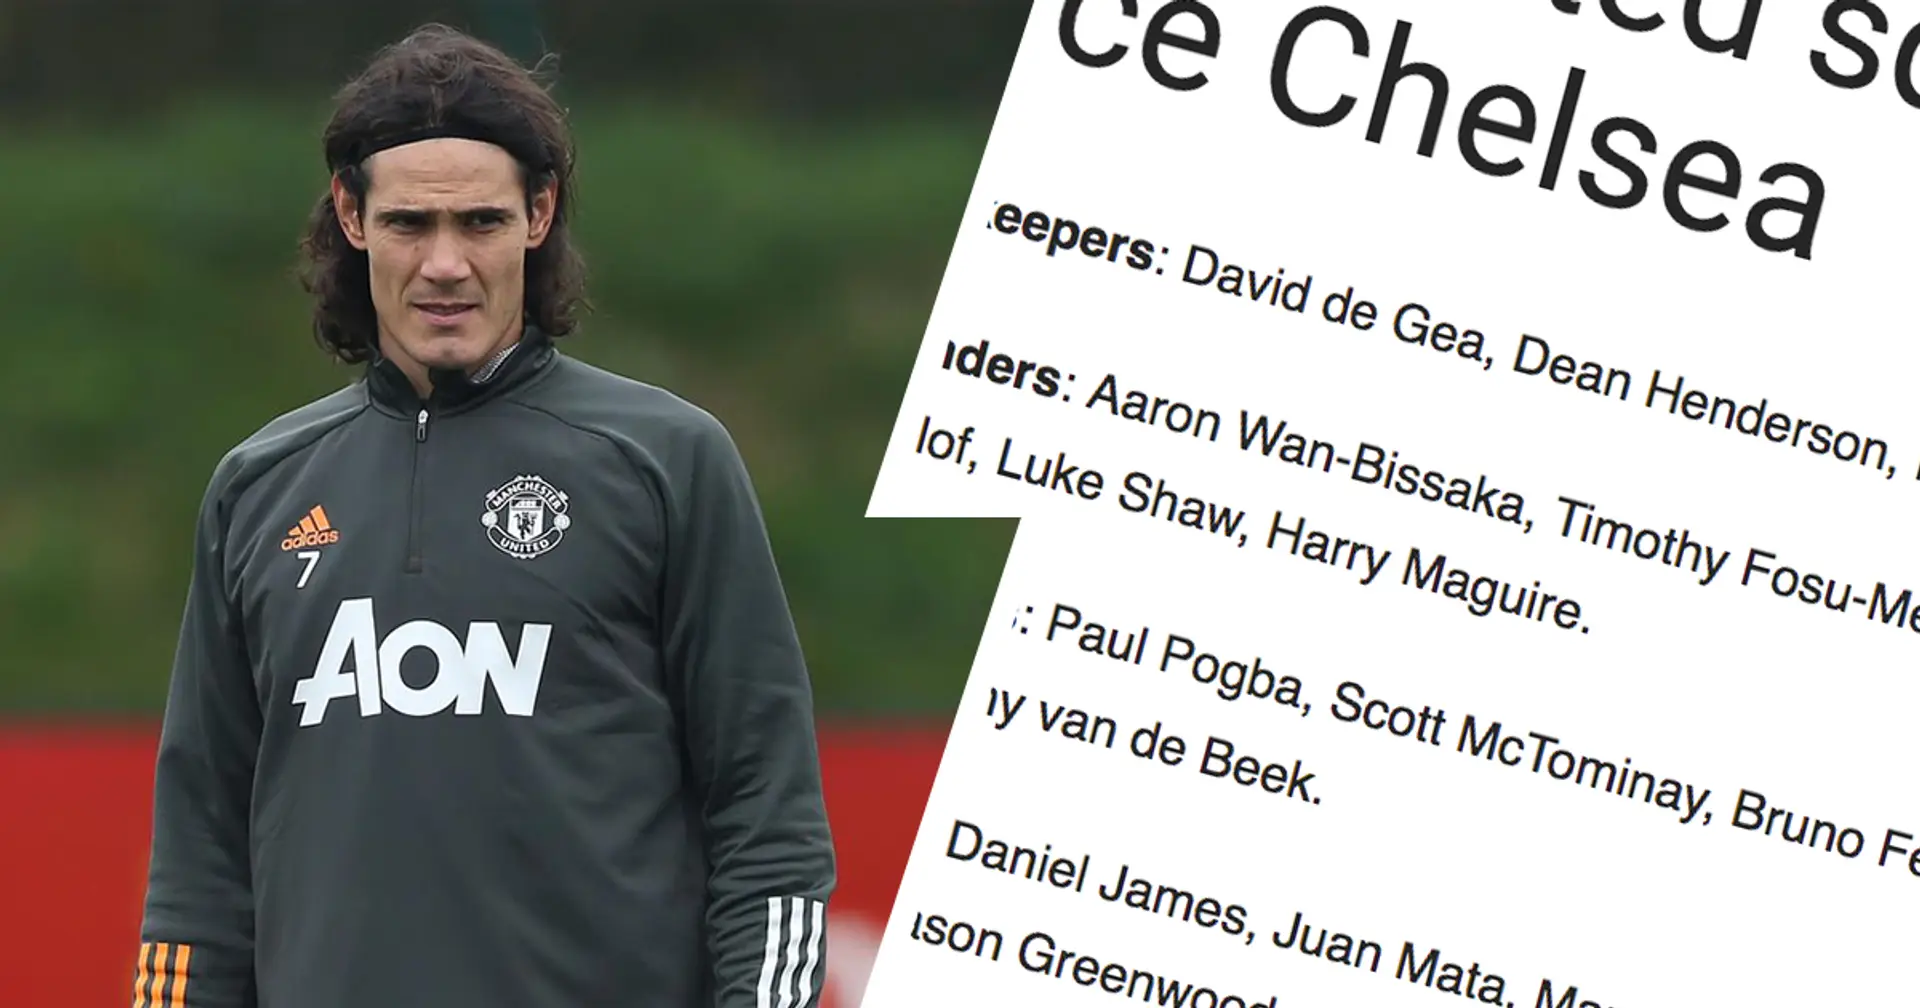 Cavani and Greenwood in: Man United's rumoured squad to face Chelsea